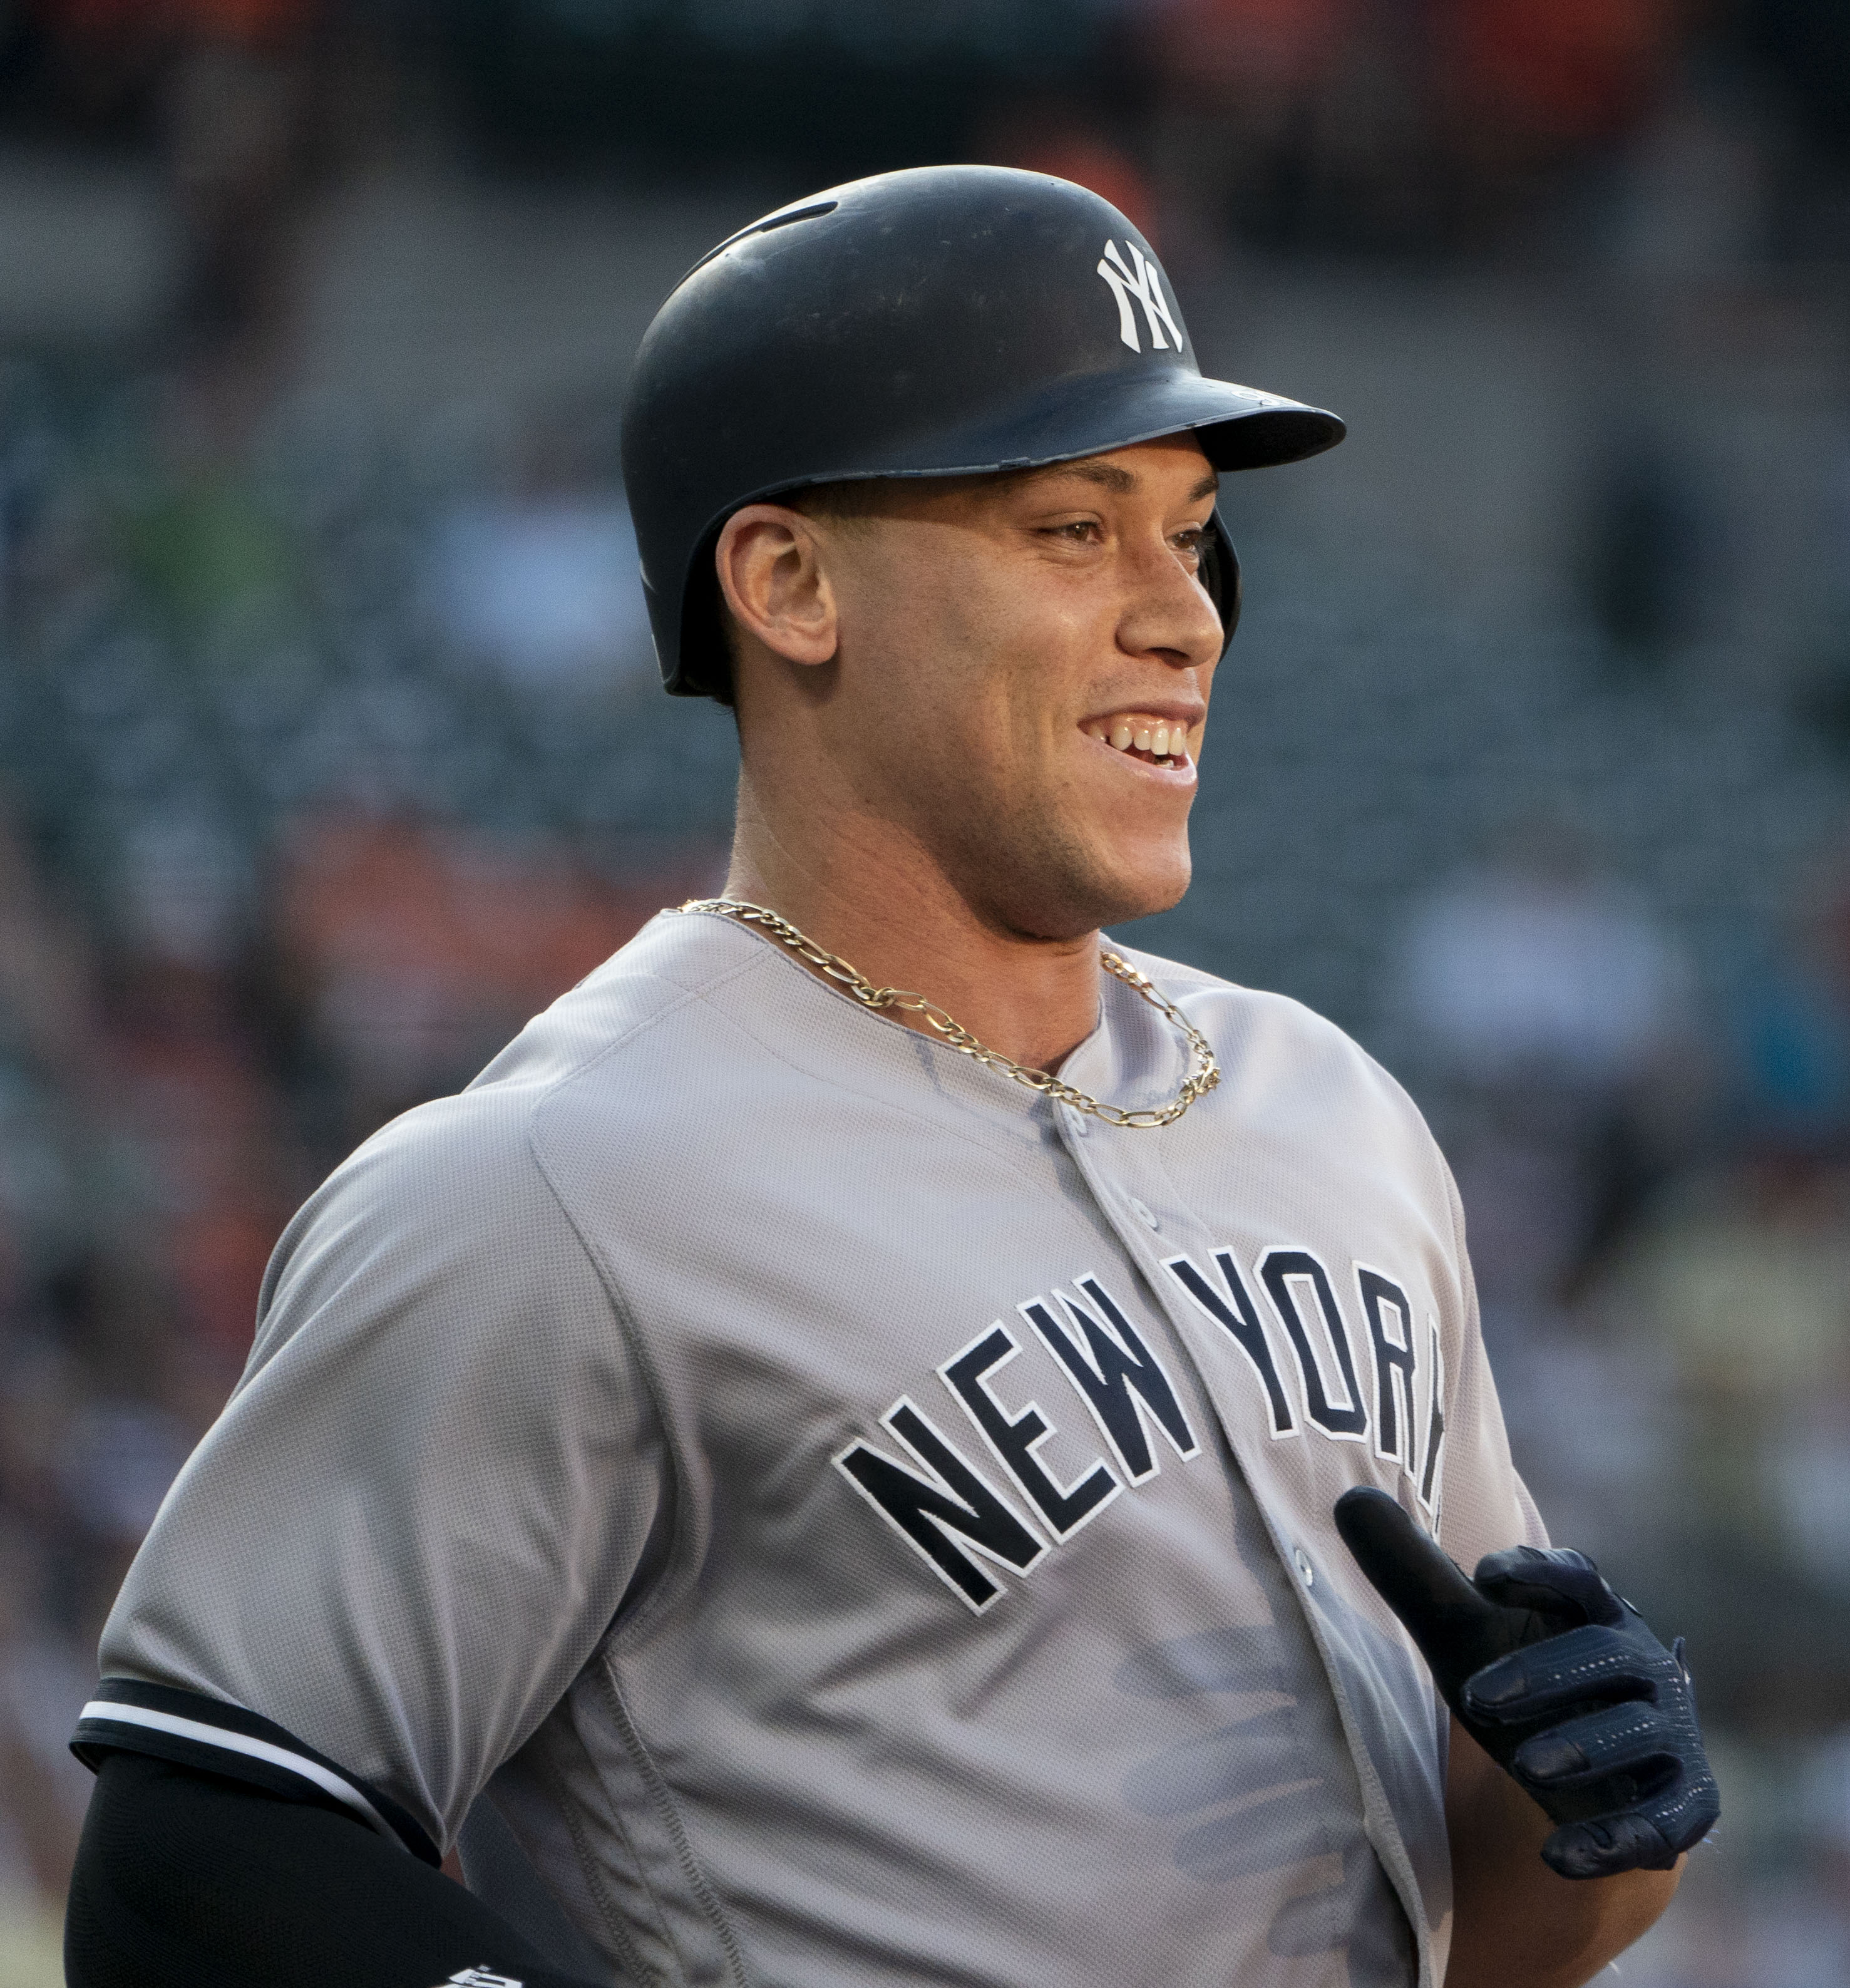 Yankees' Aaron Judge tops MLB jersey sales for 3rd year running: How to buy  your own Aaron Judge jersey